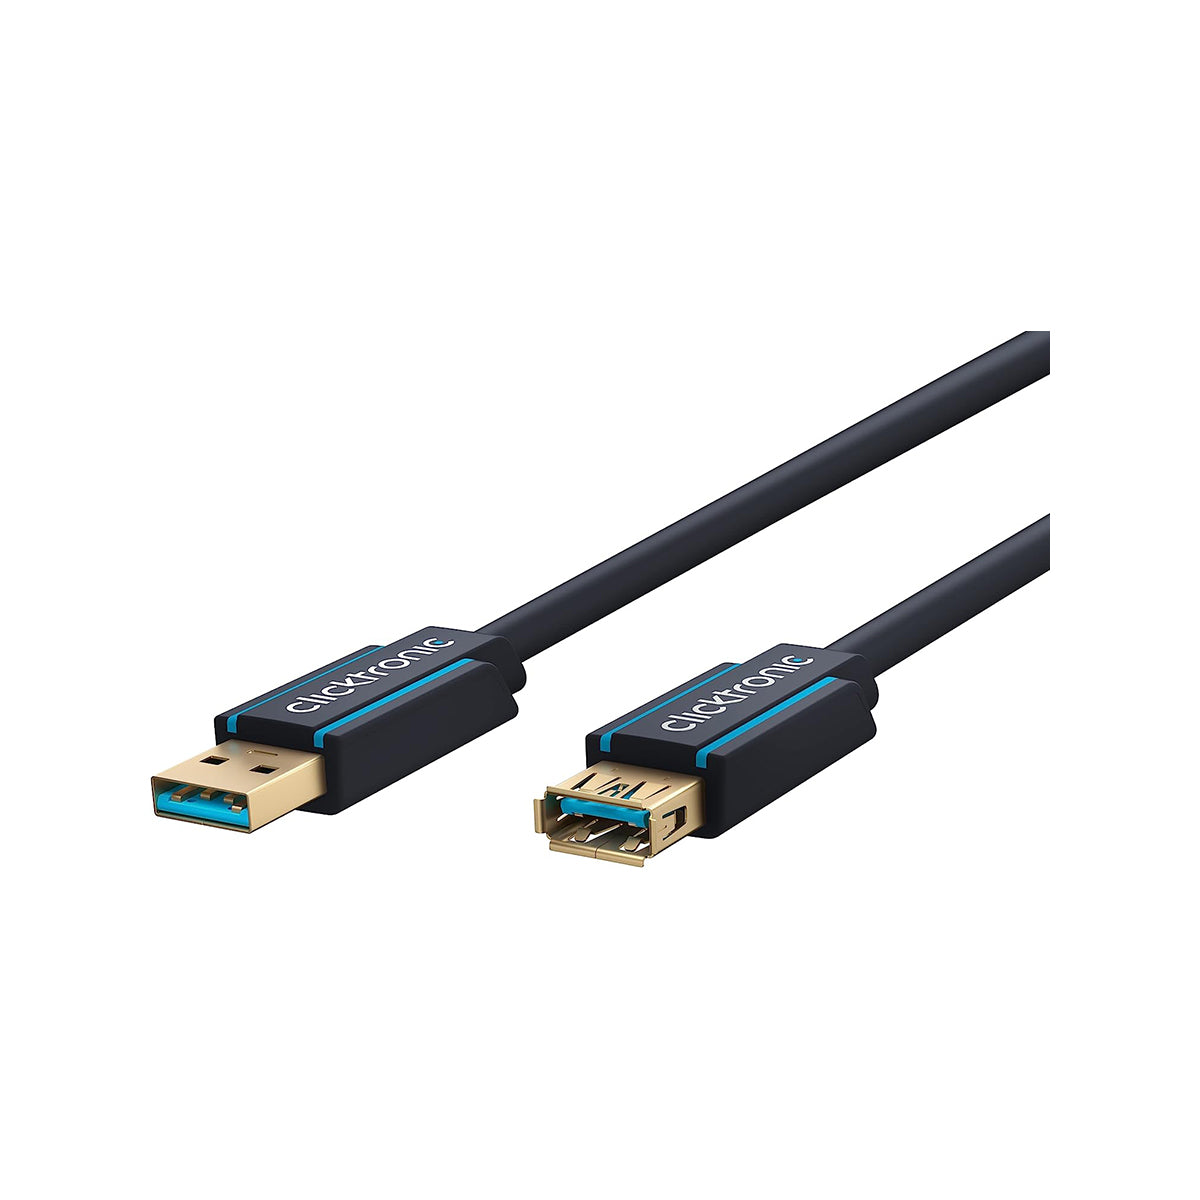 Clicktronic USB A Male to Female 3.0 Cable - 3m